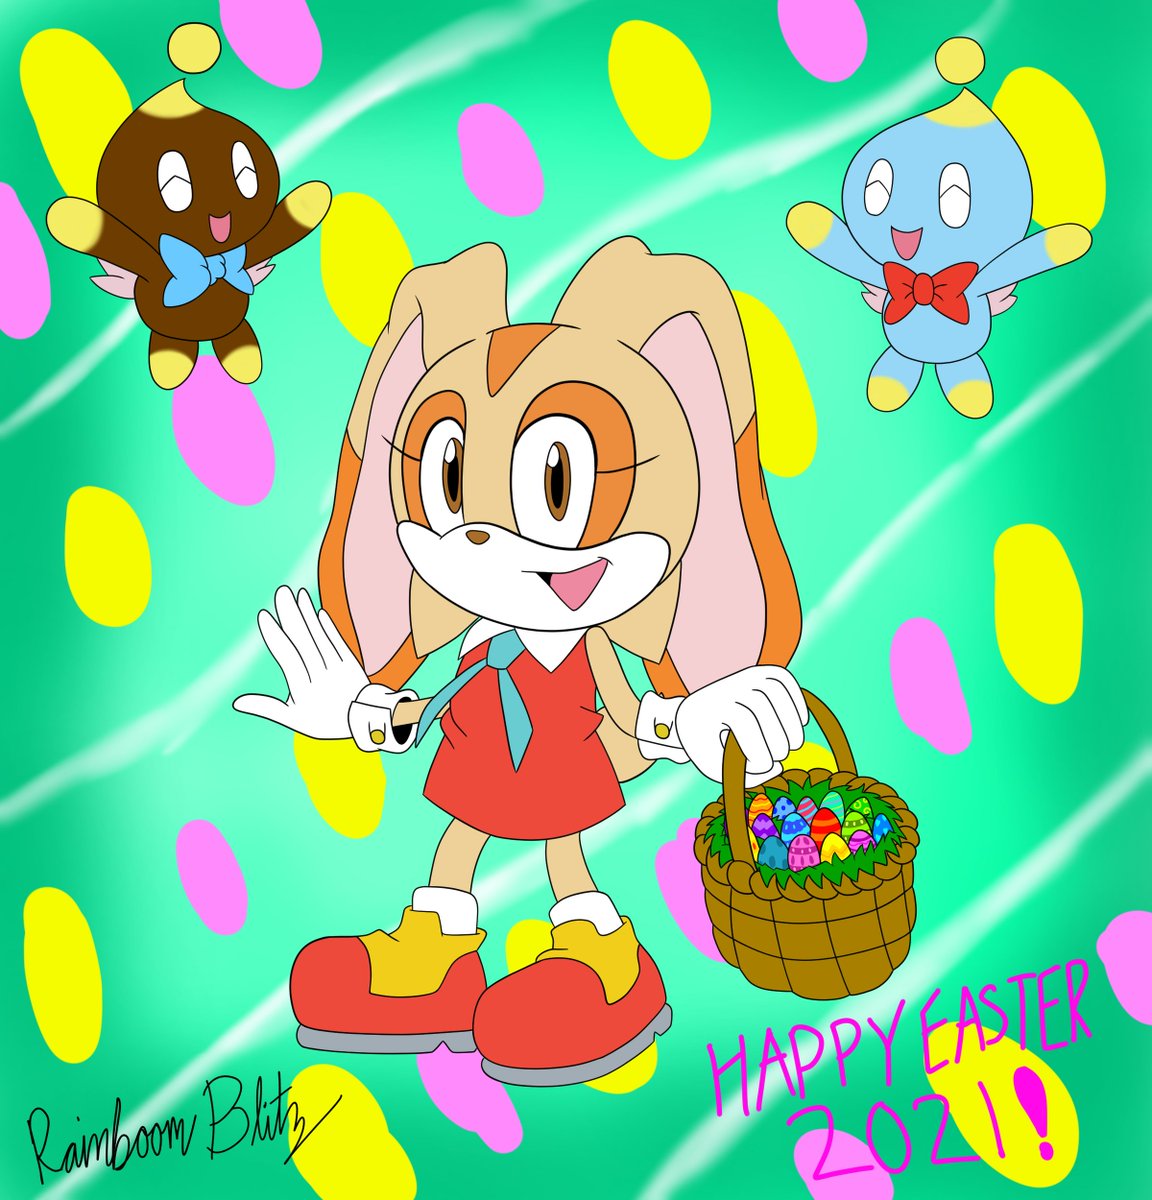 Here's Cream holding her easter basket filled with Easter Eggs with Cheese and Chocola! Here to wishing you all a grand Happy Easter day! 🐇🥚 #CreamTheRabbit #Cheese #Chocola #SonicTheHedgehog #Sonic #HappyEaster  #HappyEaster2021